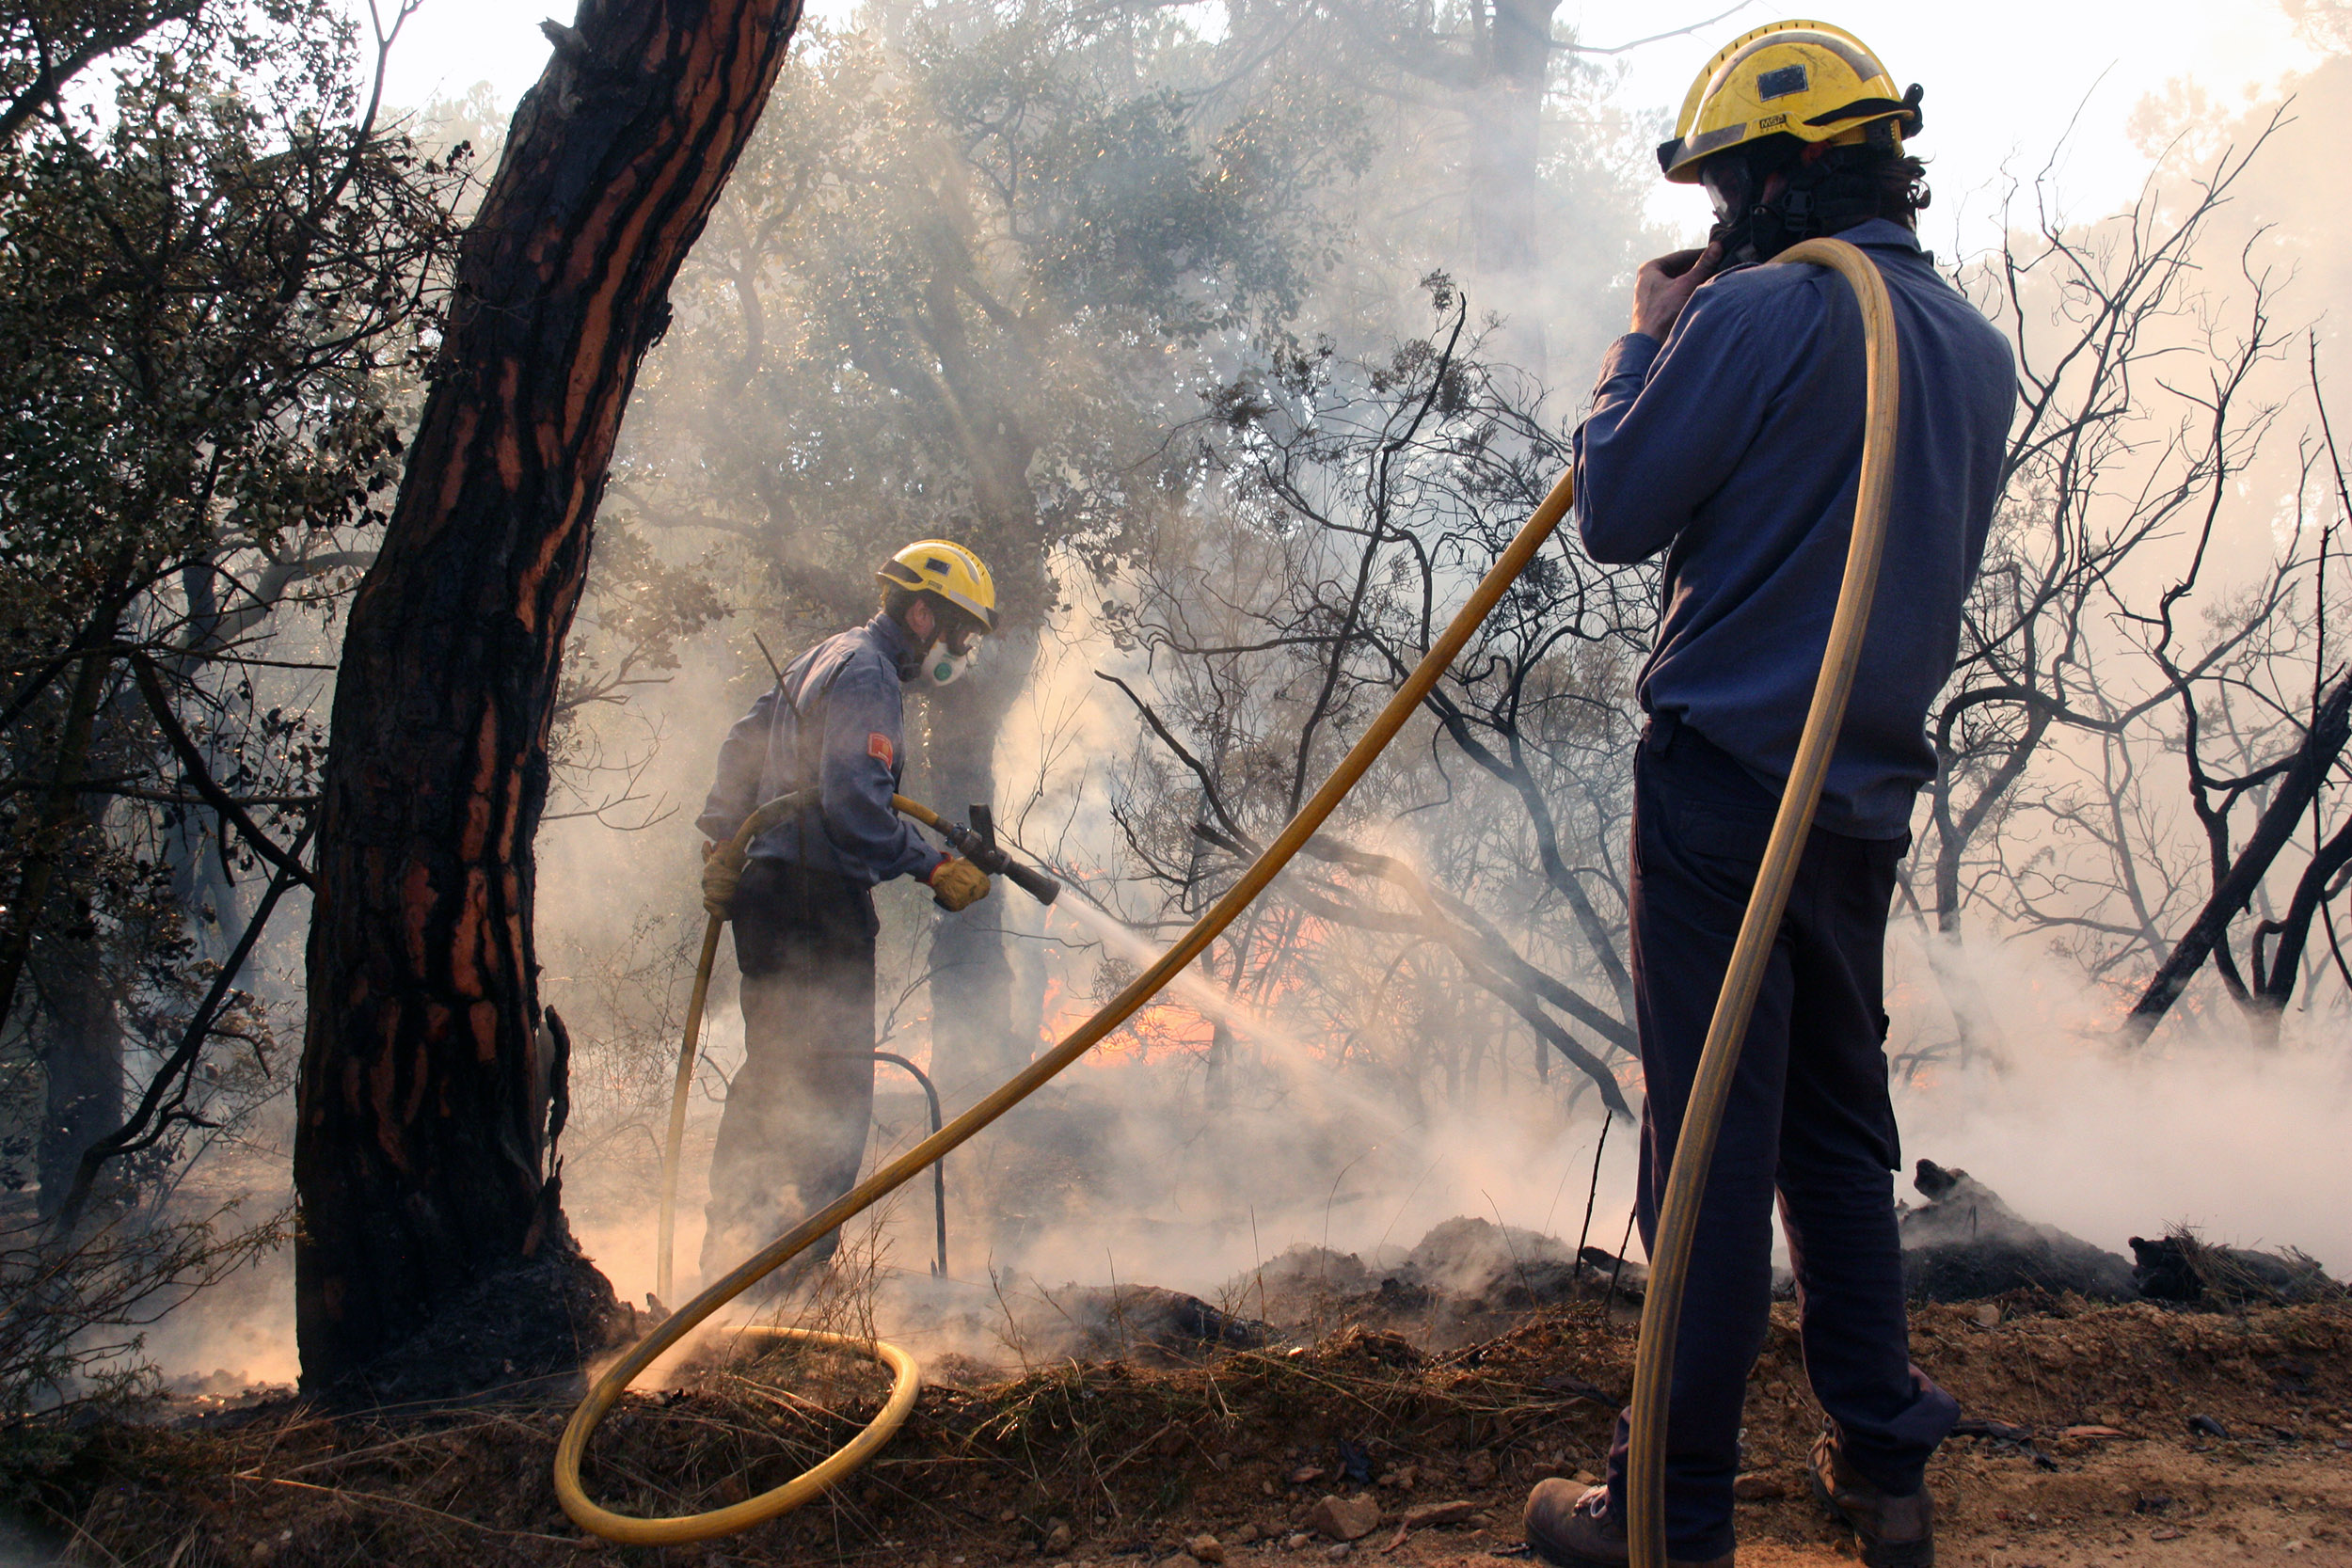 Two firefighters during a wildfire in Catalonia (by ACN)